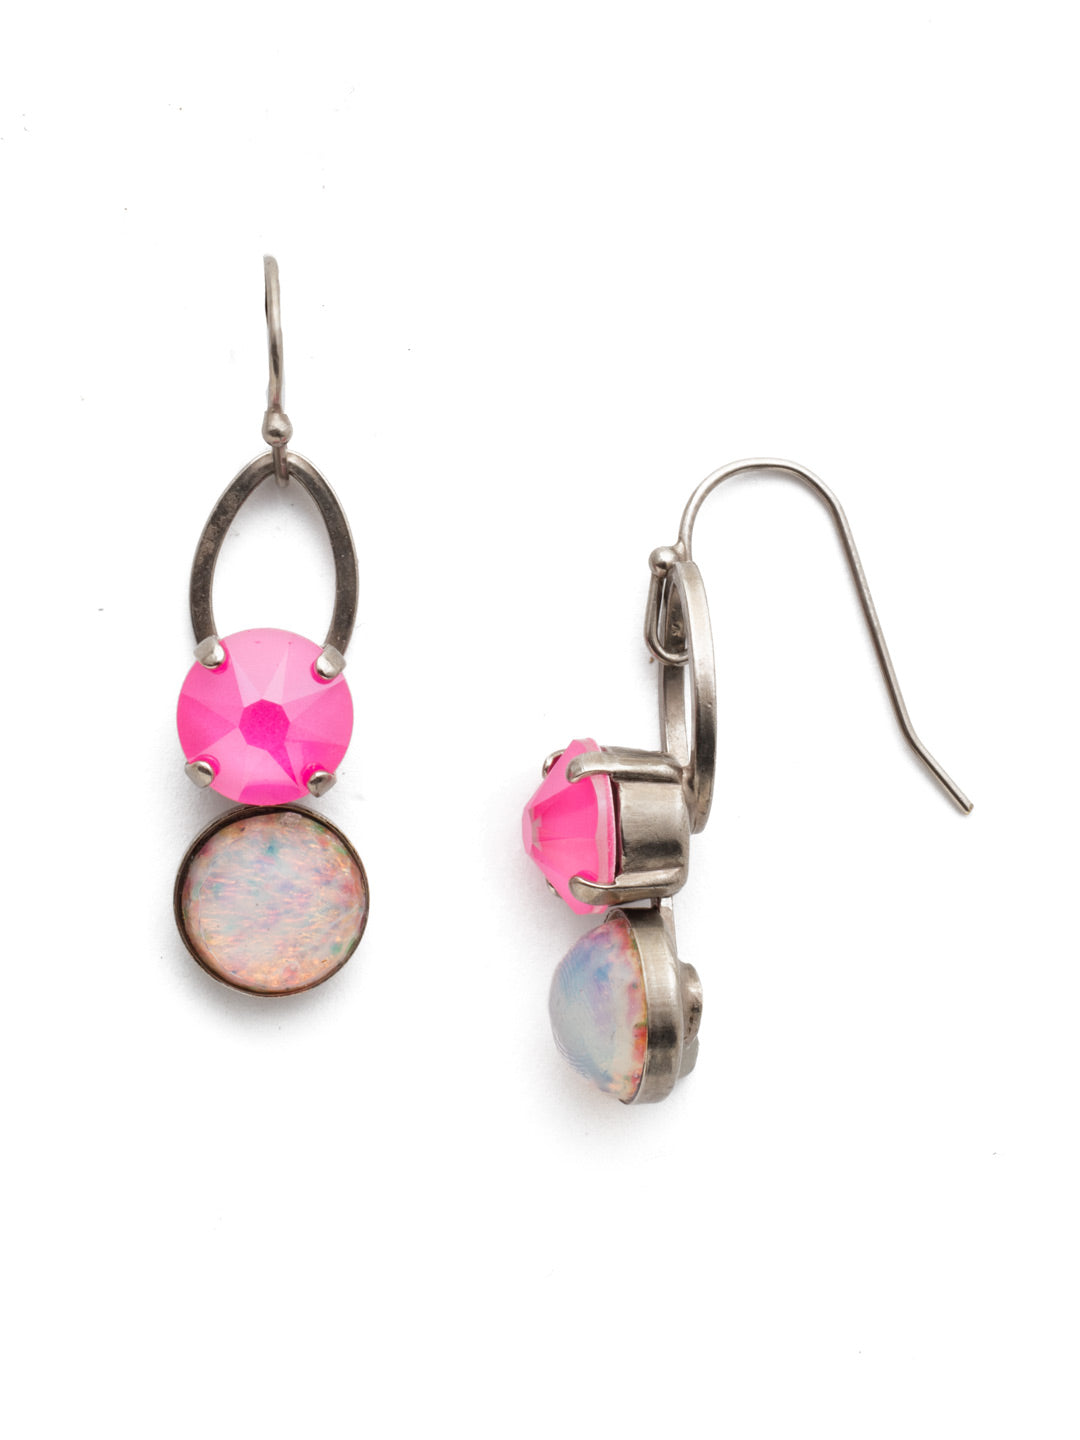 Astro Dangle Earrings - EET4ASETP - Our Astro Dangle Earrings shine like a moonlit sky. Delicate metal gives way to sparkling and opaque crystal stones. From Sorrelli's Electric Pink collection in our Antique Silver-tone finish.